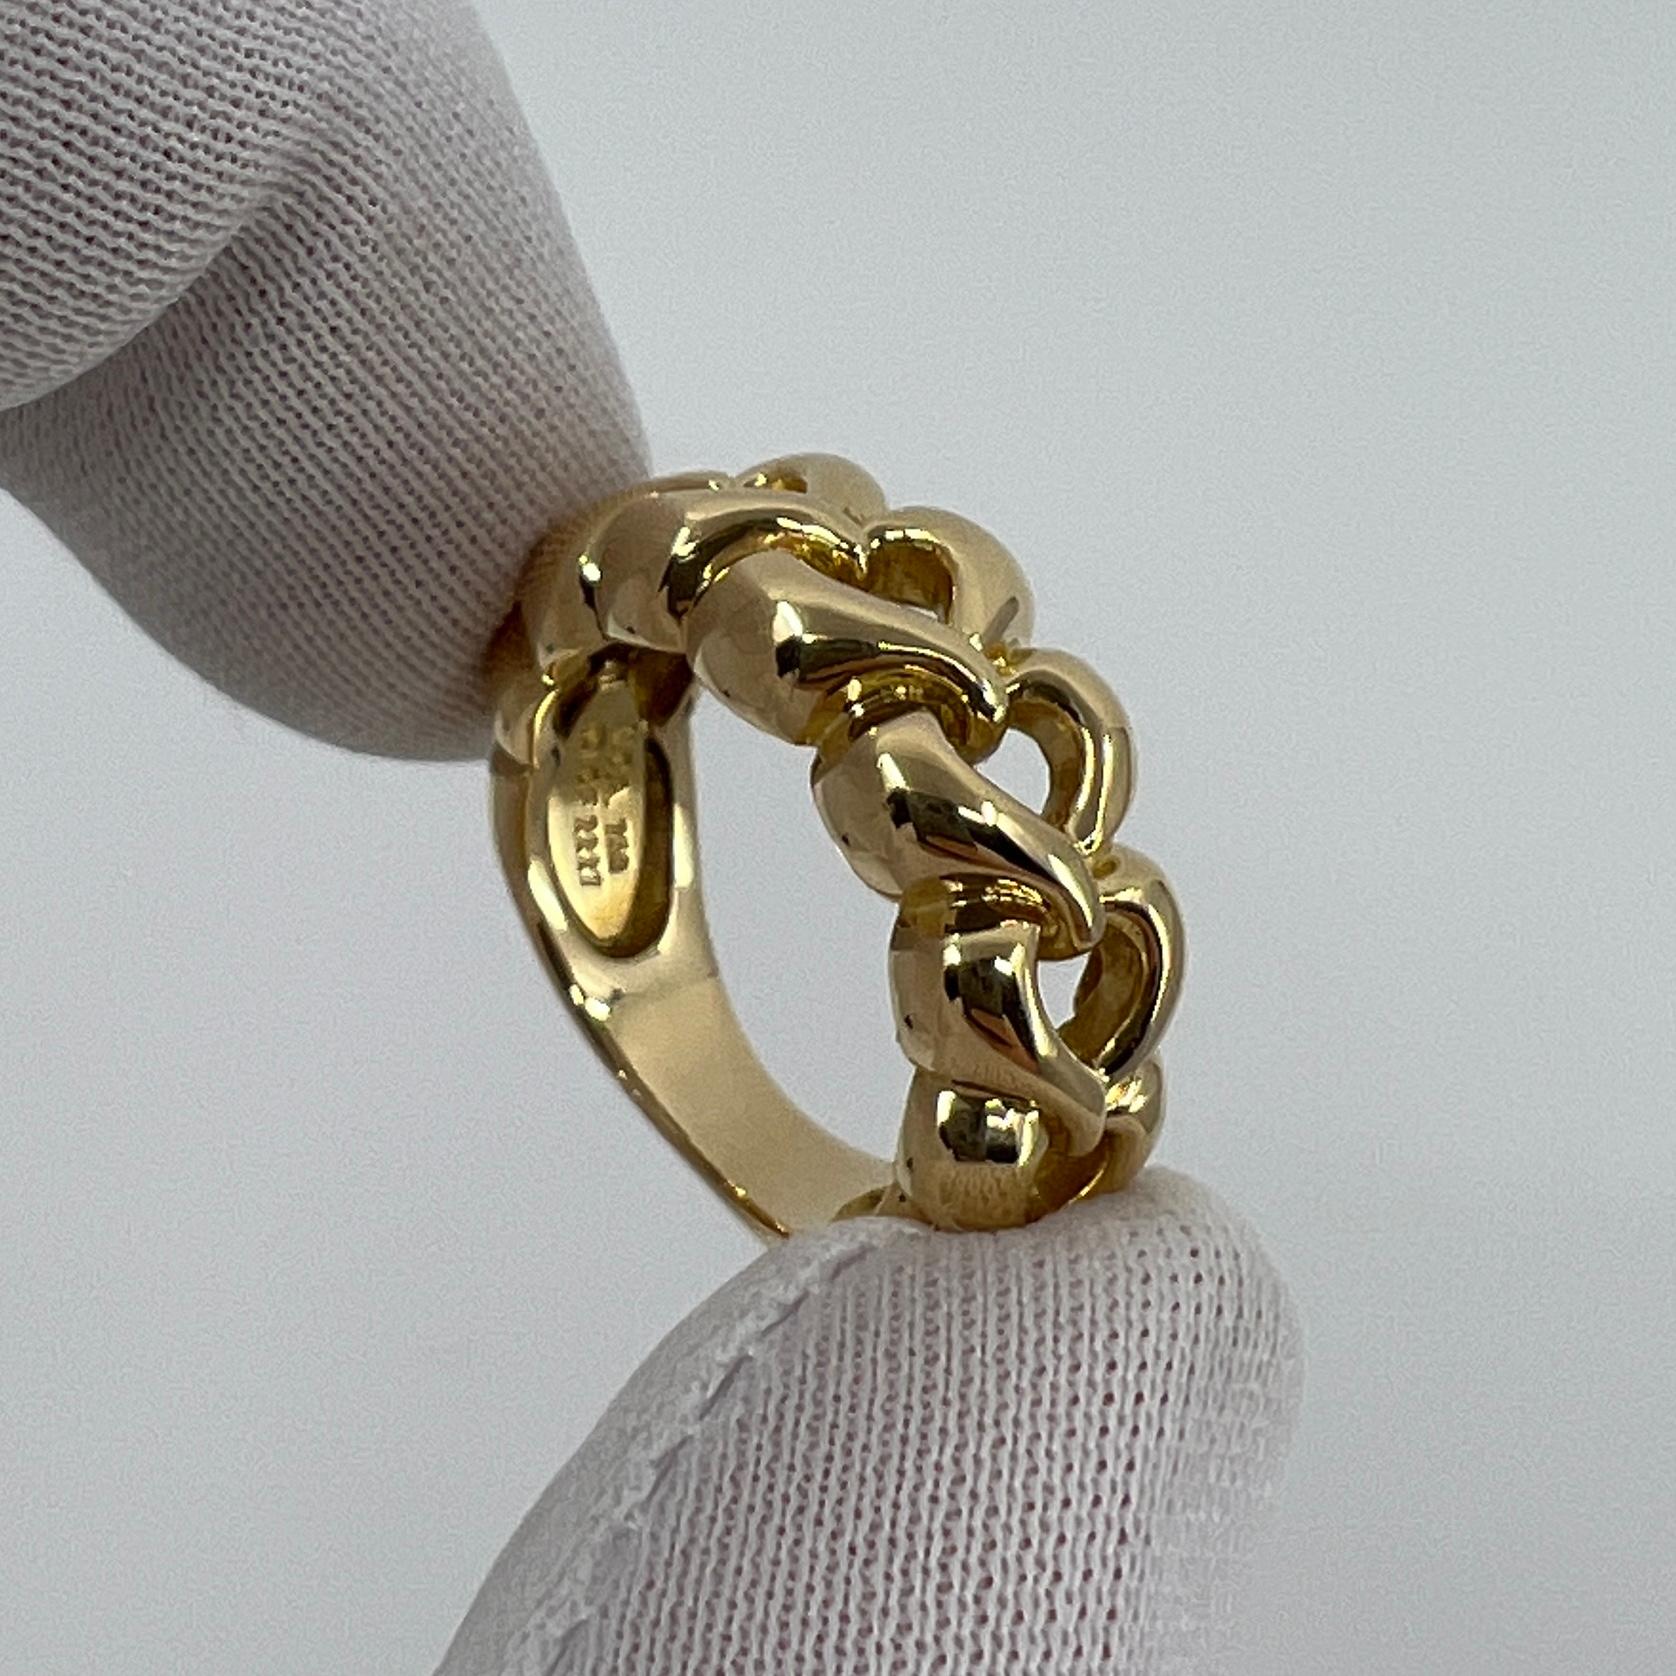 Rare Vintage Van Cleef & Arpels 18k Yellow Gold Open Heart Band Ring with Box For Sale 3